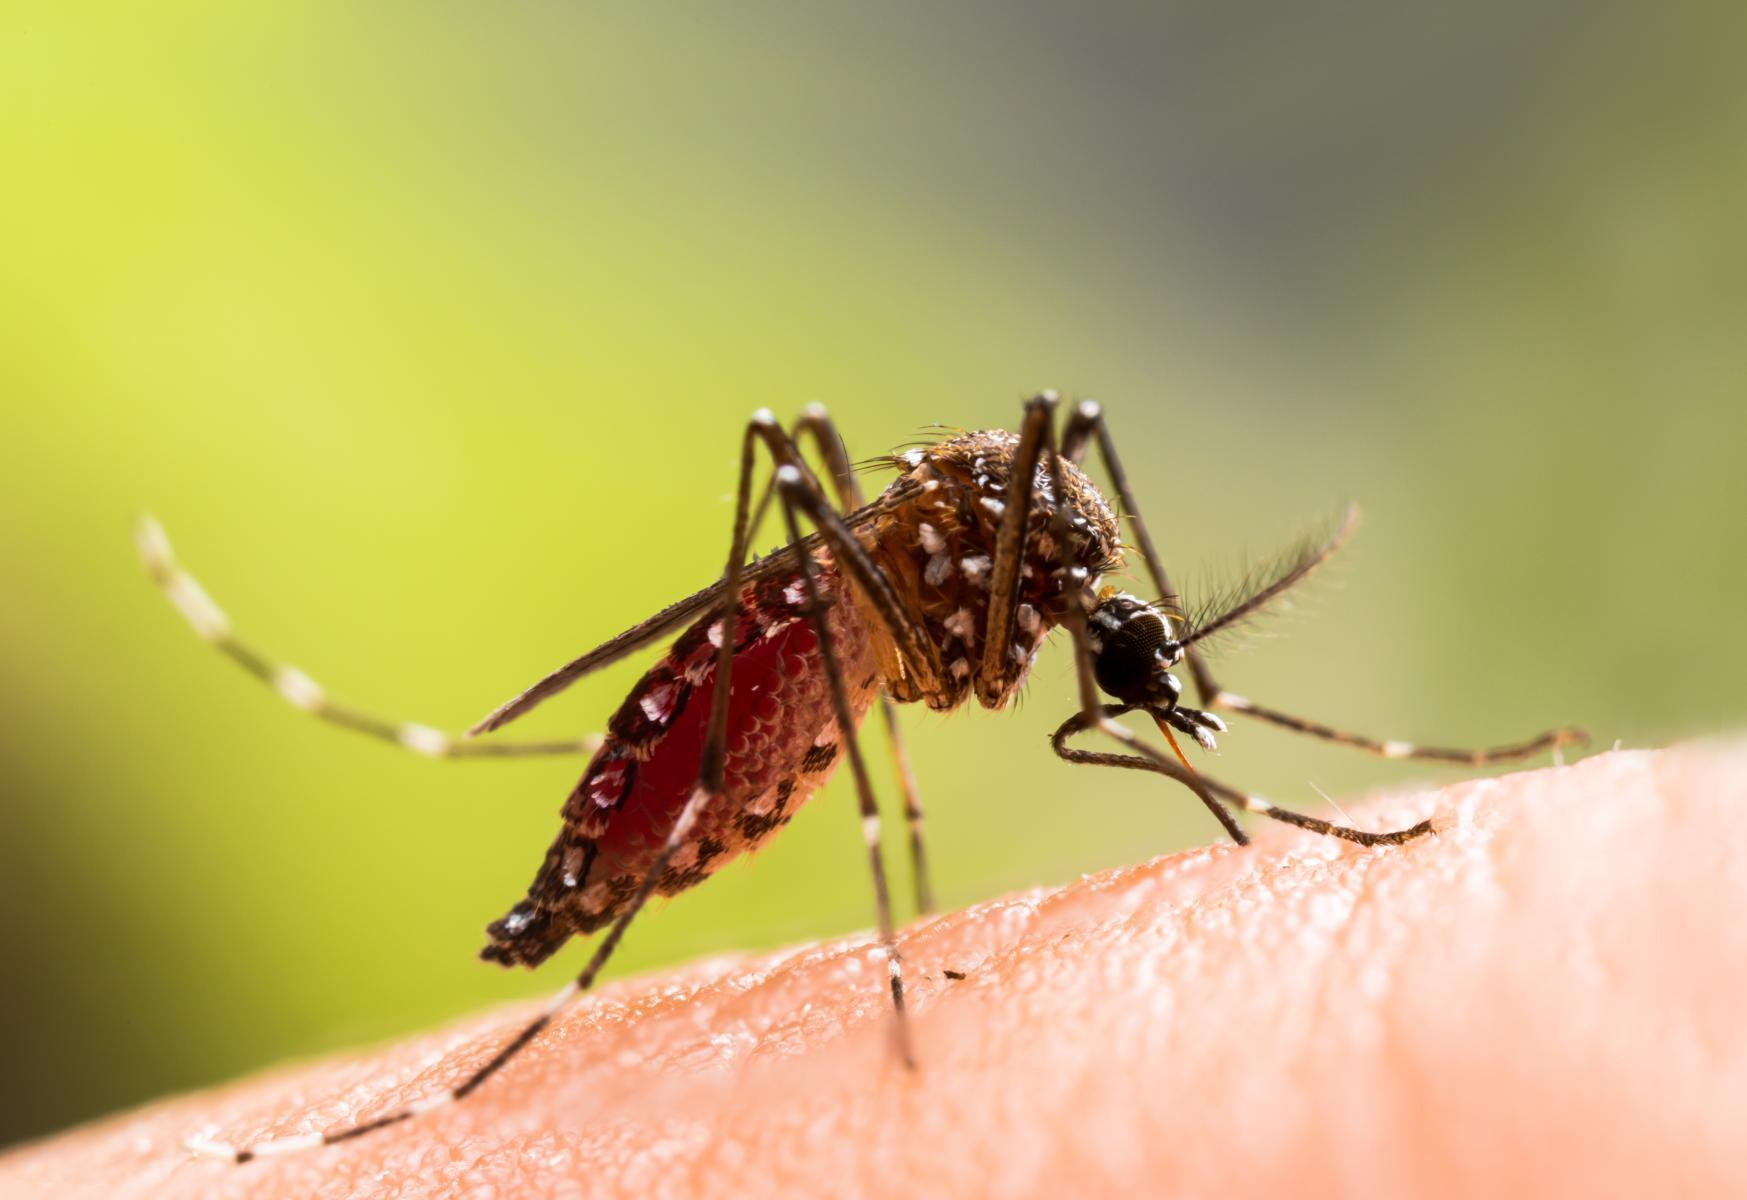 Malaria is spread through bites by infected mosquitoes. Over 249 million malaria cases were reported worldwide in 2022